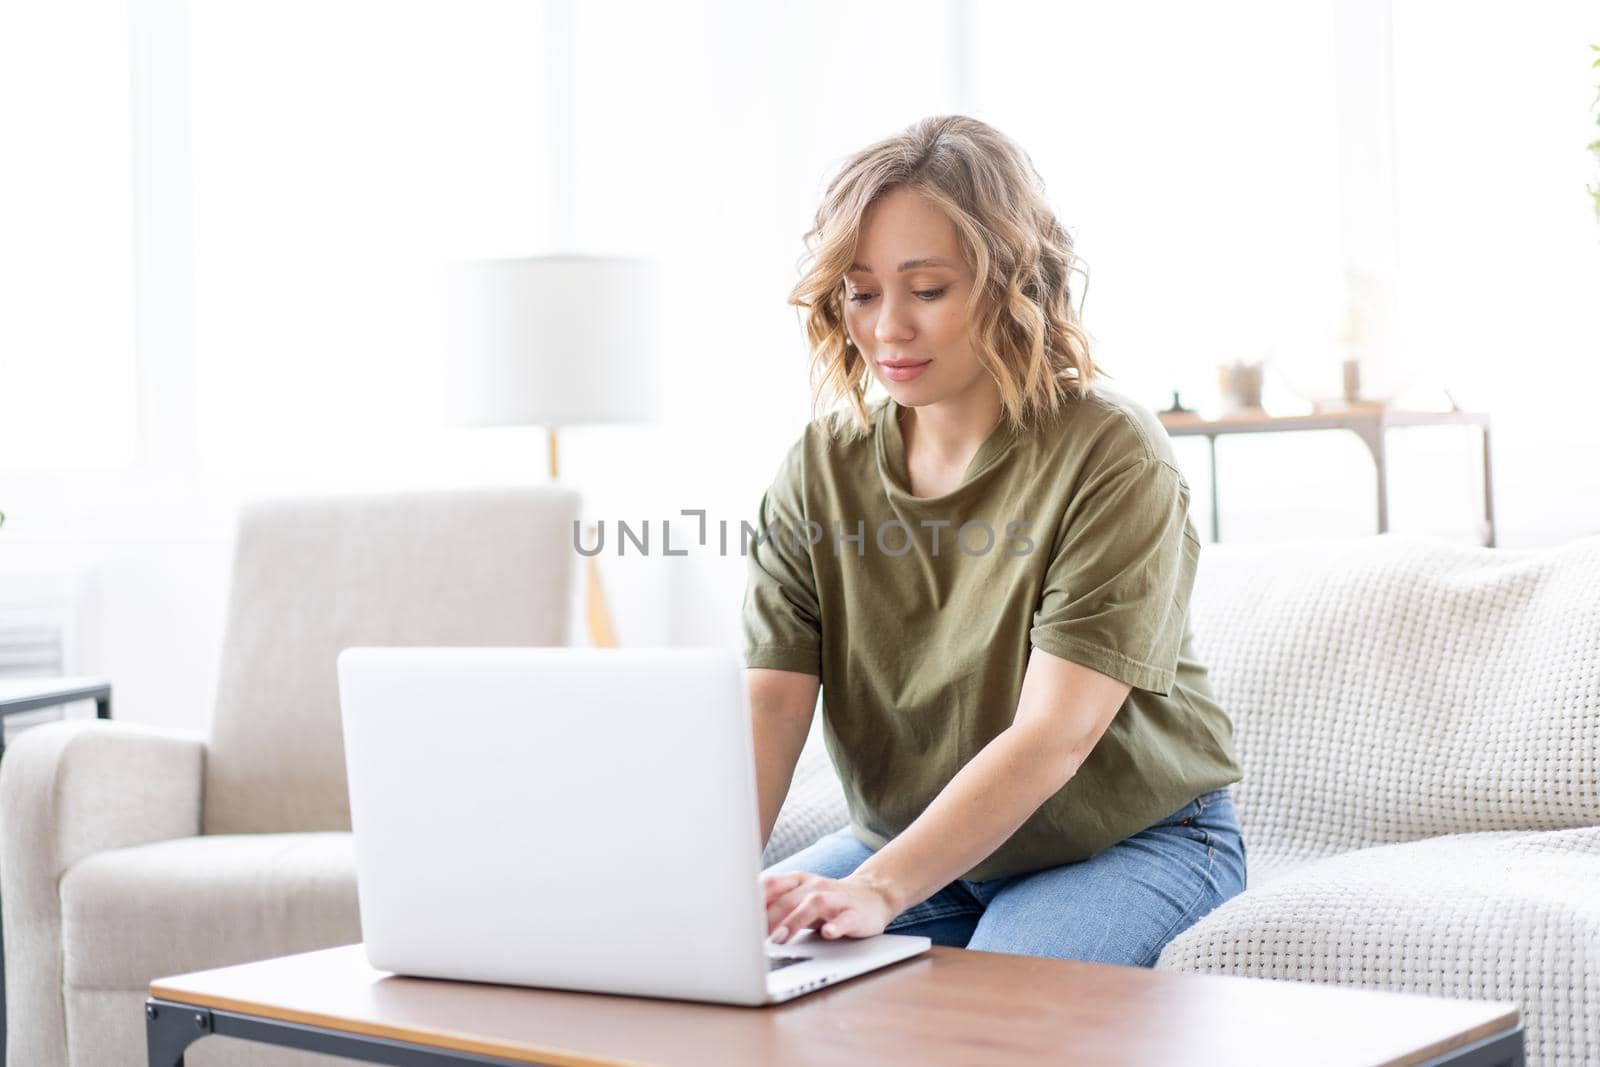 Woman use laptop computer while sitting couch big window background home interior Freelance female working from home Distance learning student relaxing watch lessons video conference .